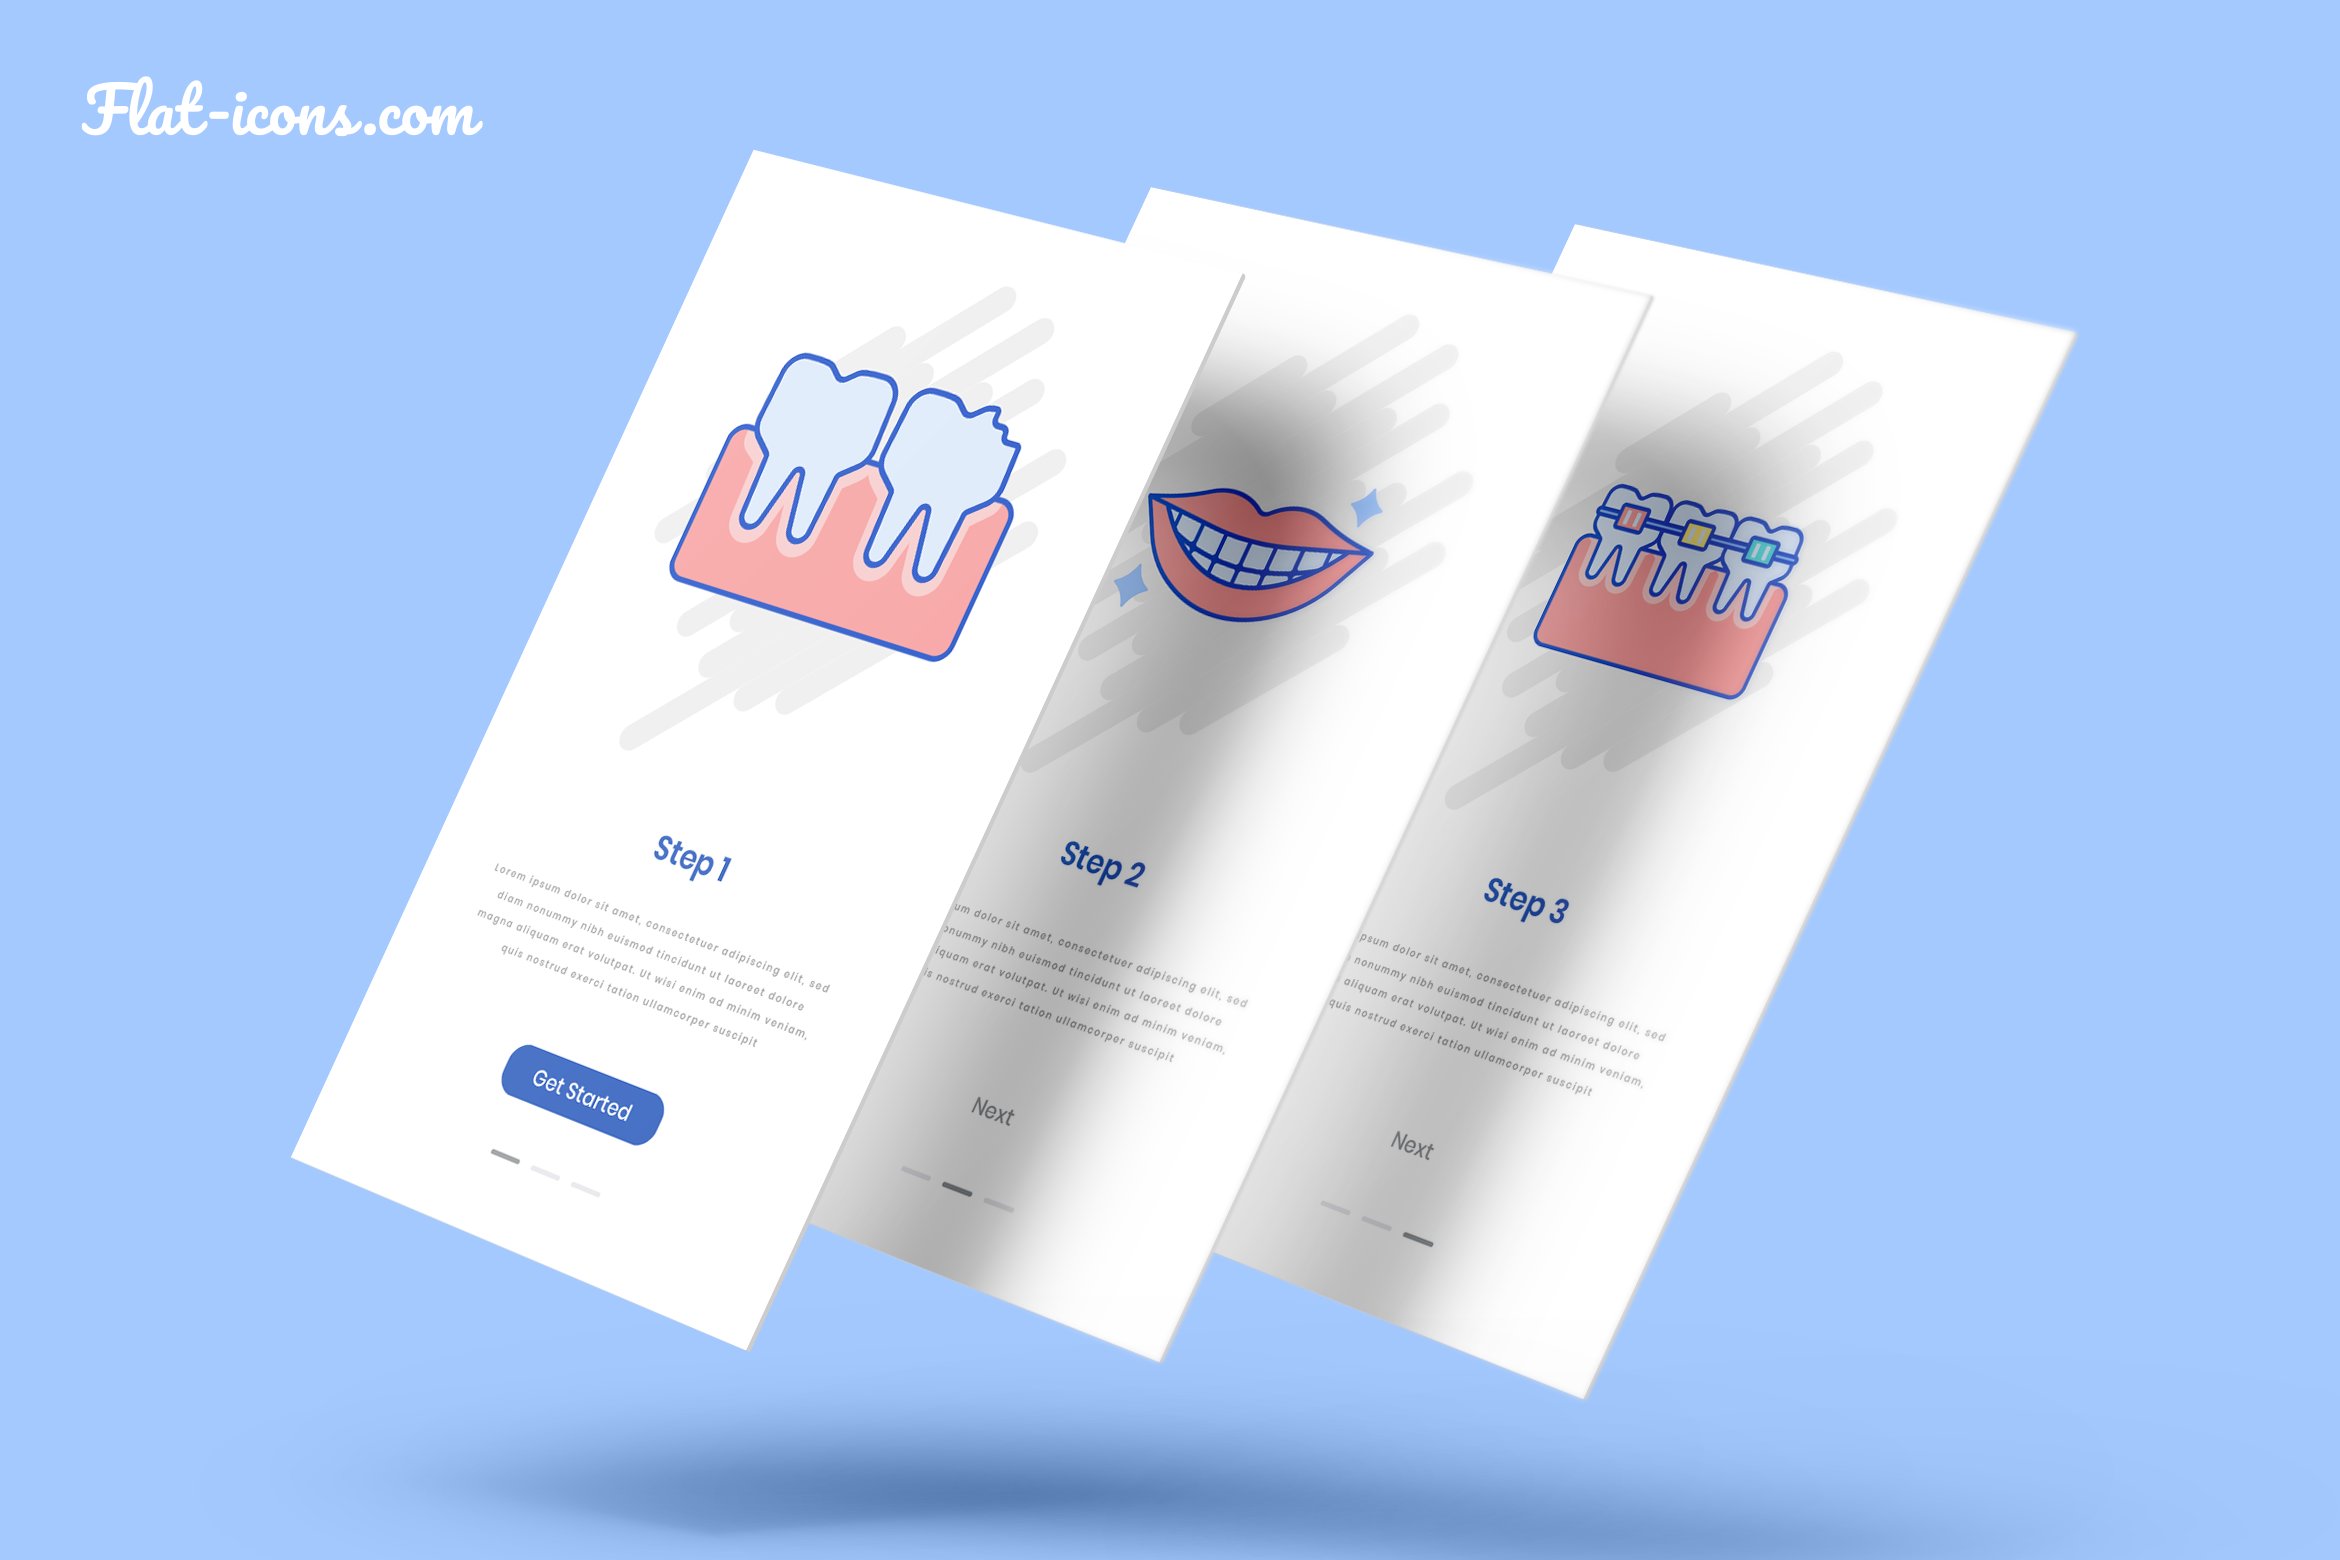 Some orthodontic cards with tooth icons.